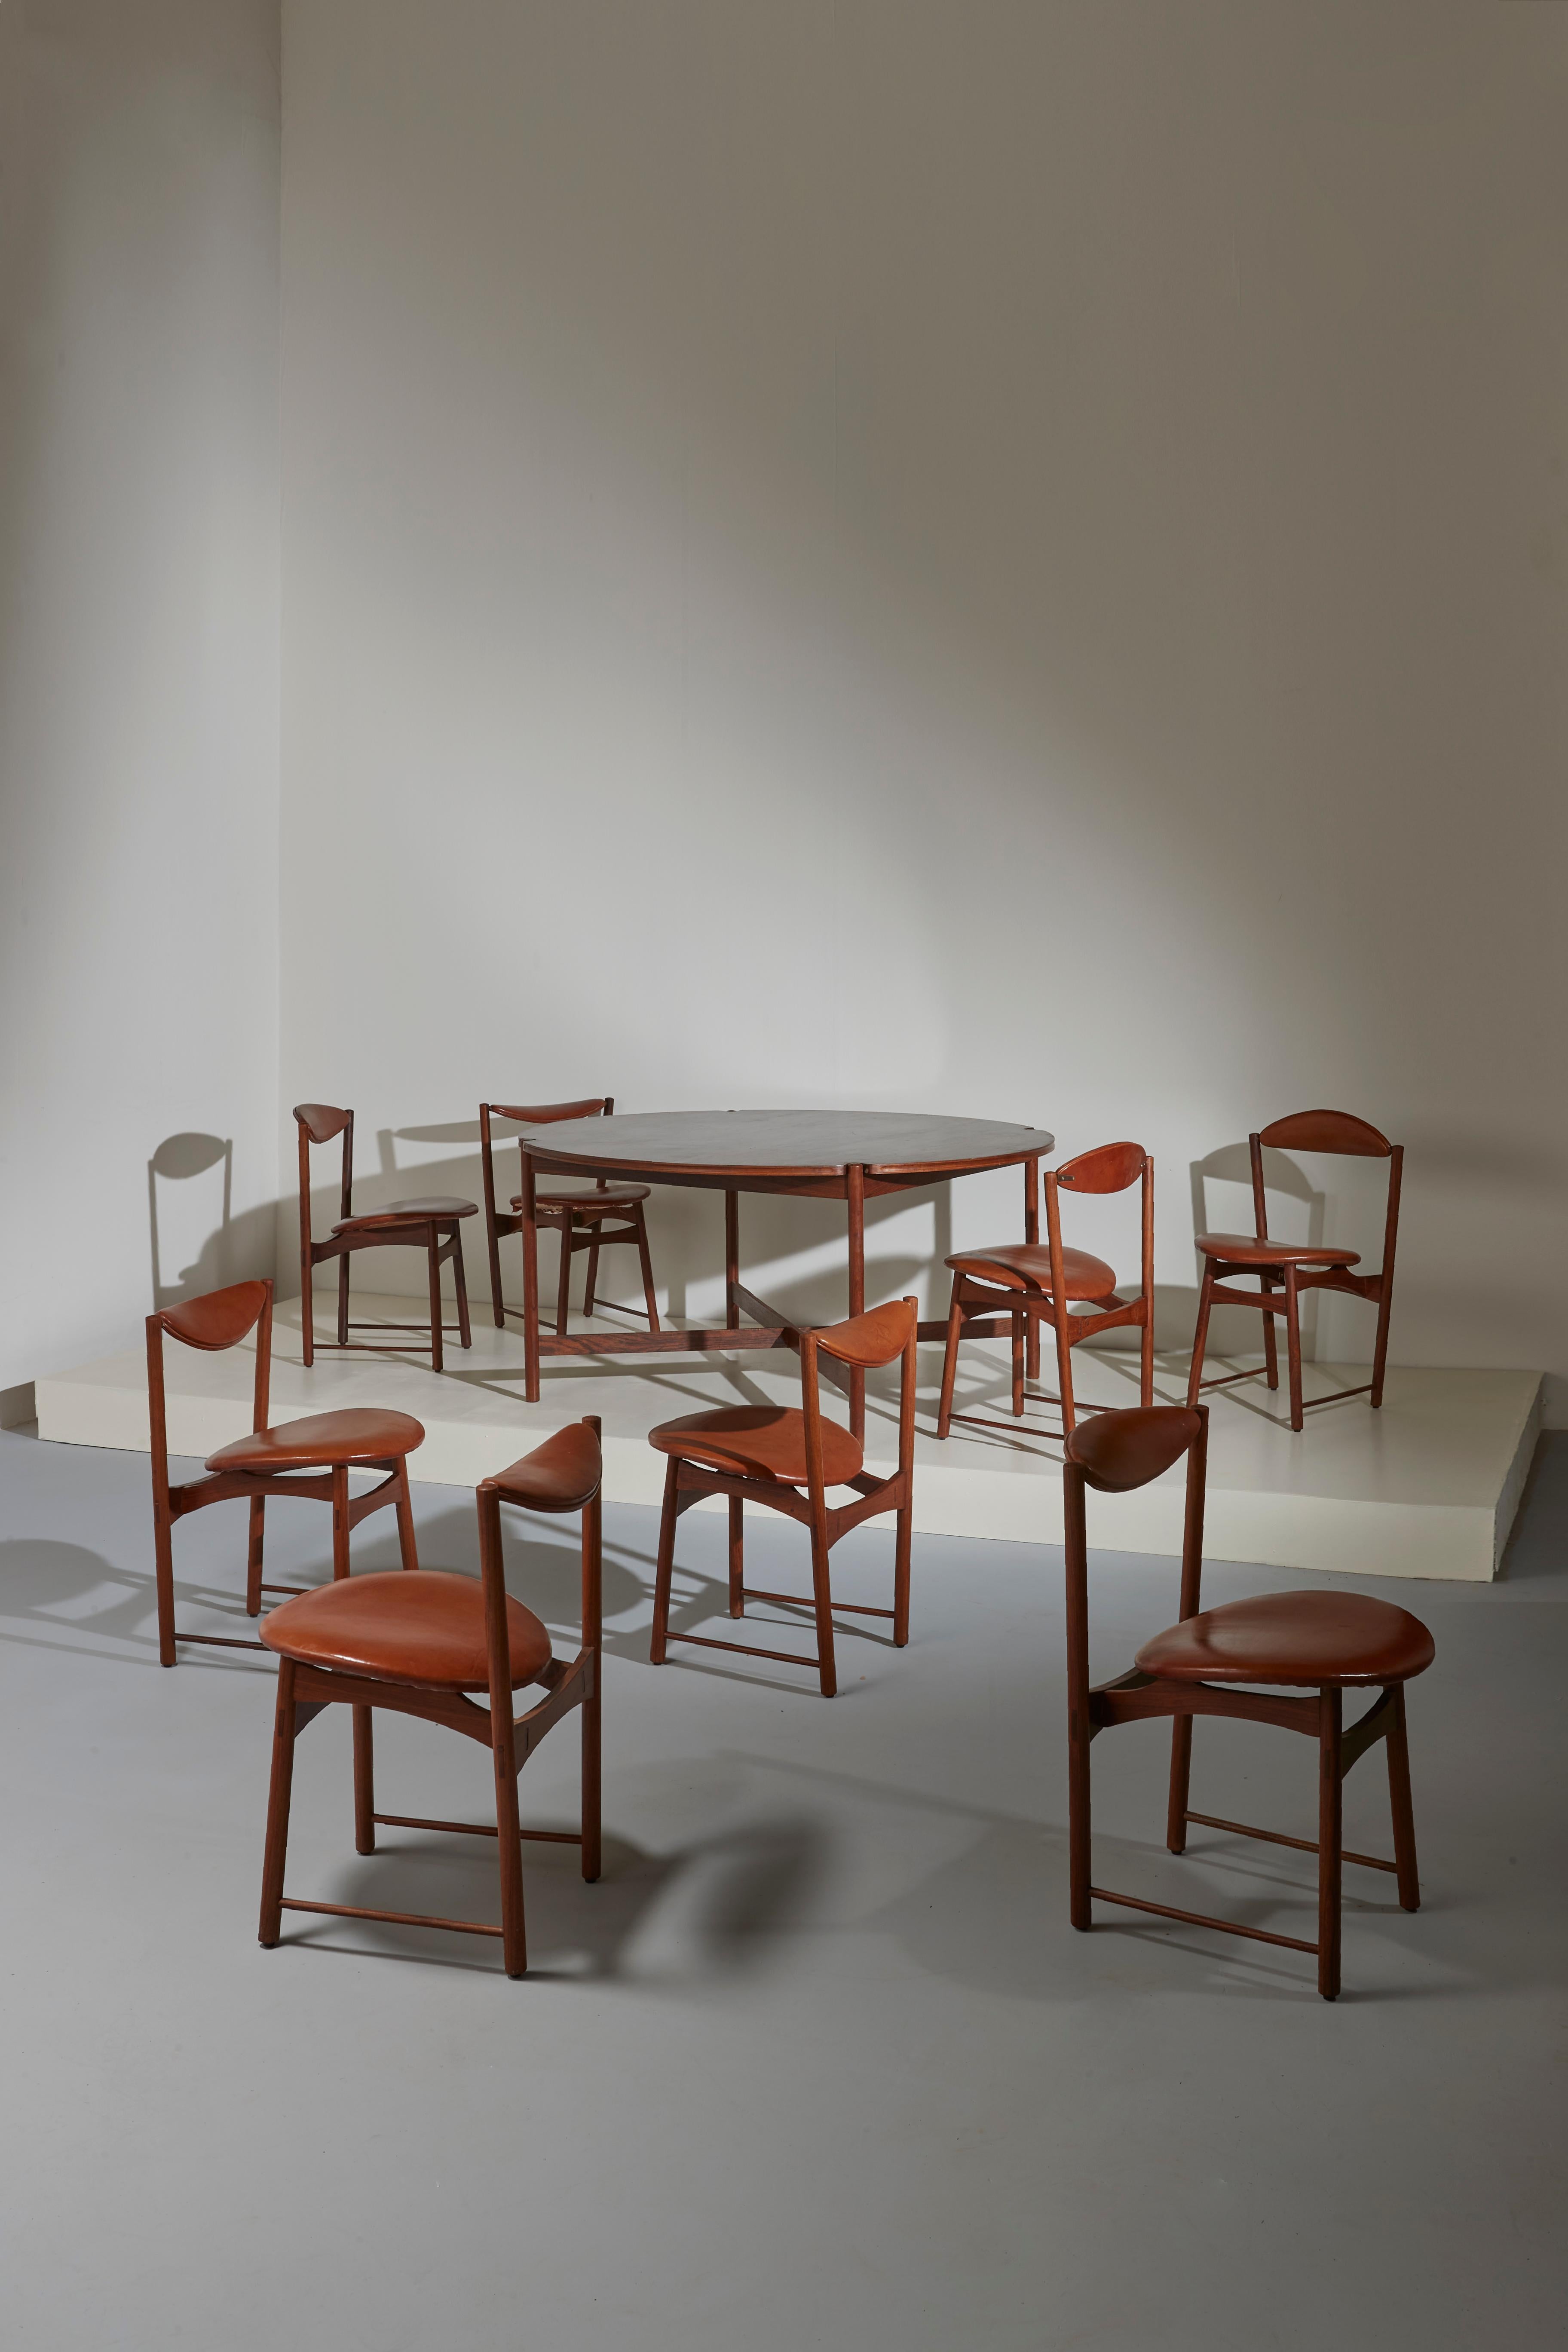 A very particular and beautiful set of eight dining chairs with tilting backrests and slanting legs. A perfect set if you are looking for chairs from the Mid-Century Modern period but that can be unique, different: yours.

Made in teak and reddish